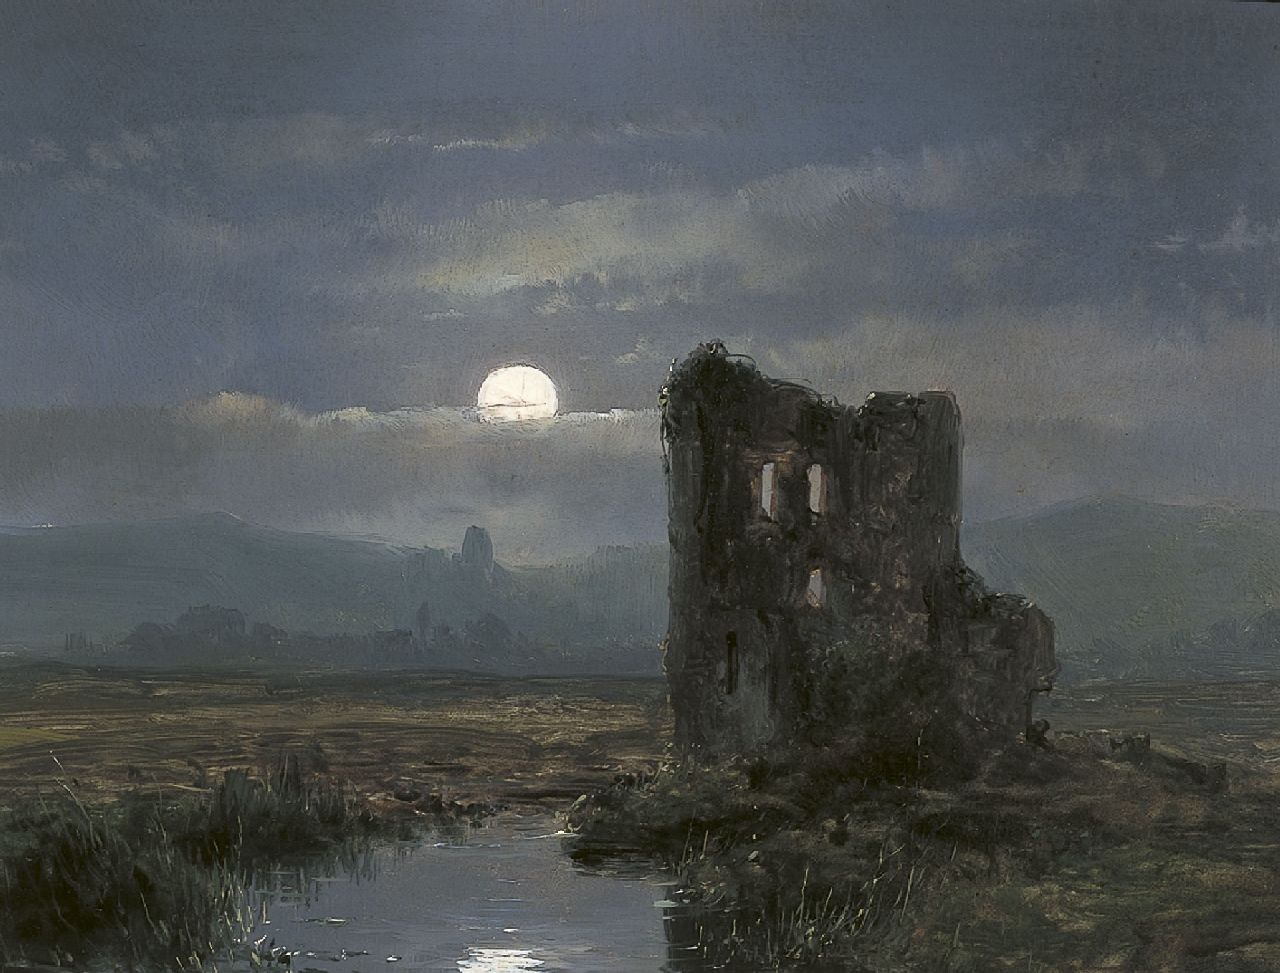 Schelfhout A.  | Andreas Schelfhout, A ruin in a moonlit landscape, oil on panel 17.3 x 22.0 cm, dated 1854 on the reverse